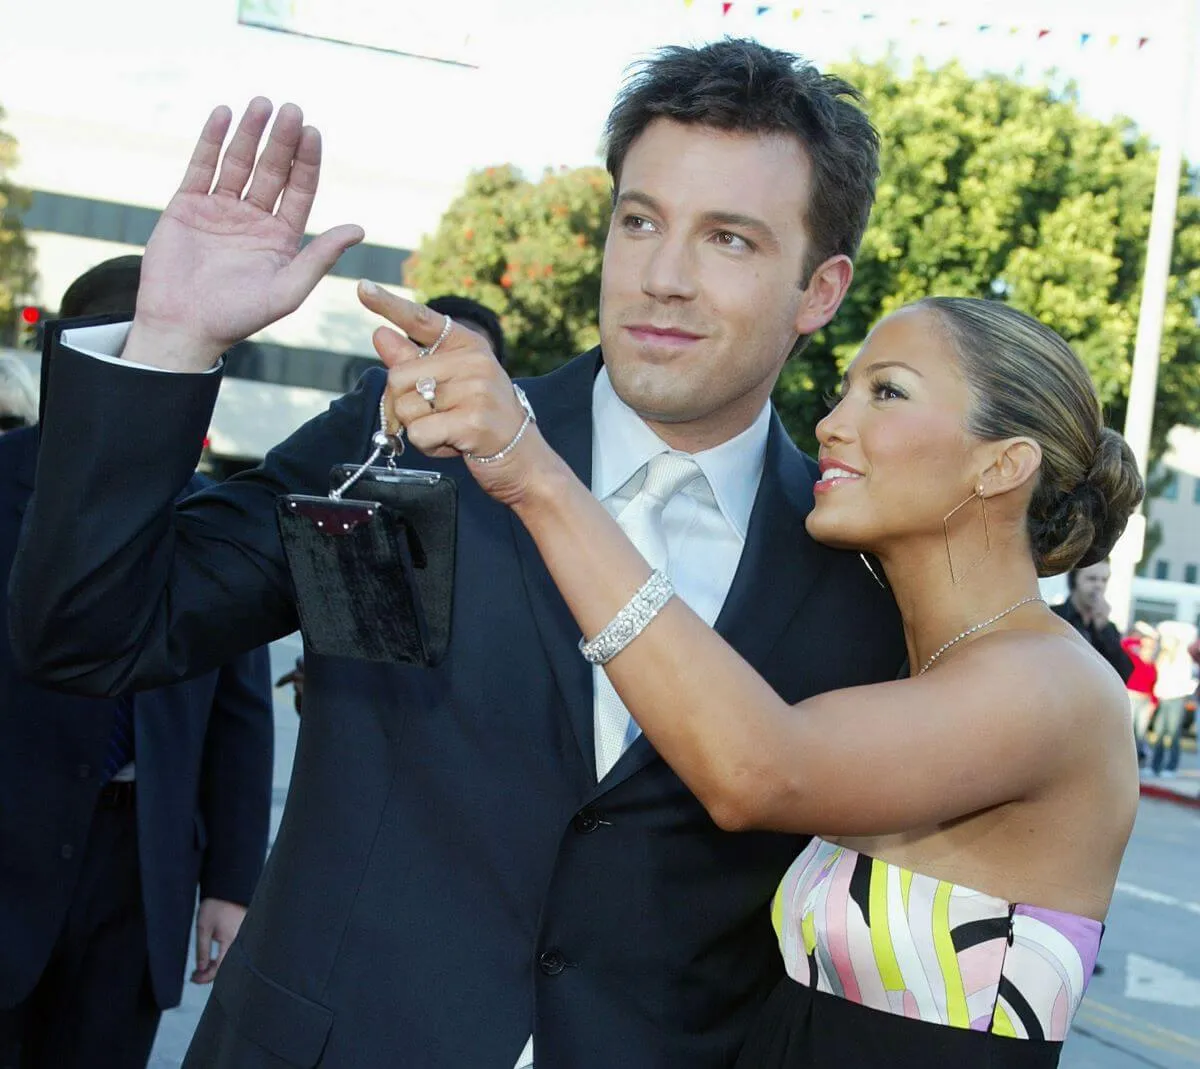 Ben Affleck wears a suit and lifts his arm to wave. Jennifer Lopez stands next to him and points.